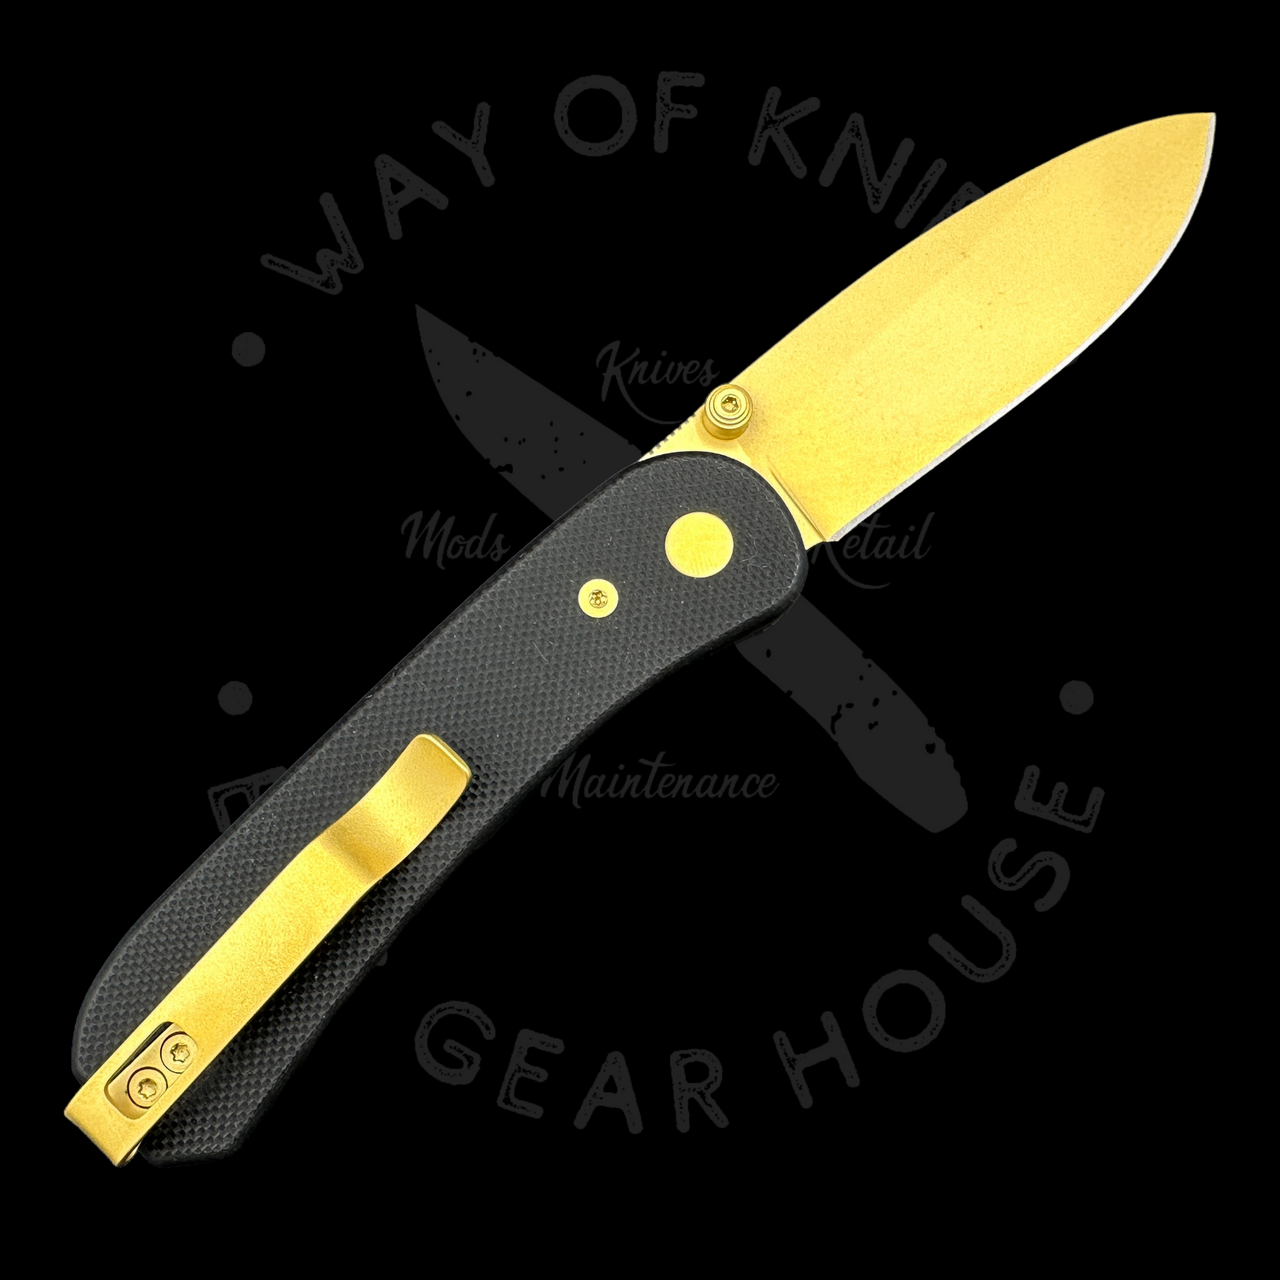 16 Most Common EDC Pocket Knife Blade Shapes And Their Uses – Knafs